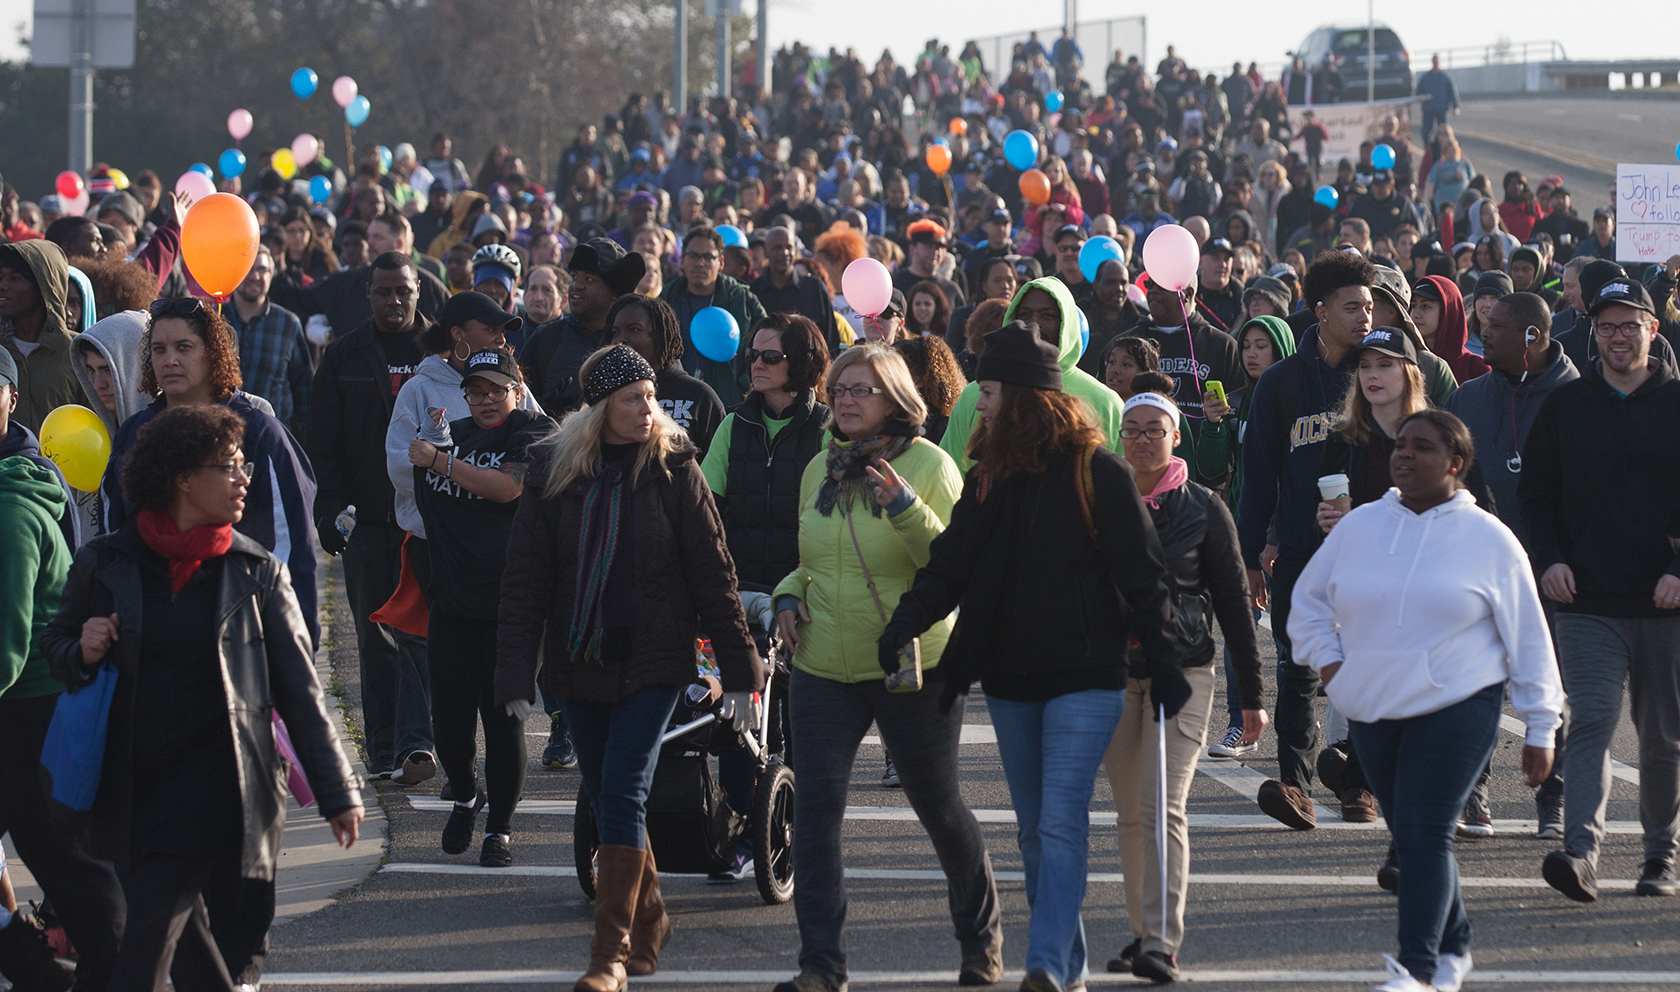 Thousands marched together for the 26th annual MLK365 march in honor of Dr. Martin Luther King Jr. The march began at Sacramento City College and ended six miles away at the Sacramento Convention Center. Vanessa S. Nelson | Photo Editor | vanessanelsonexpress@gmail.com